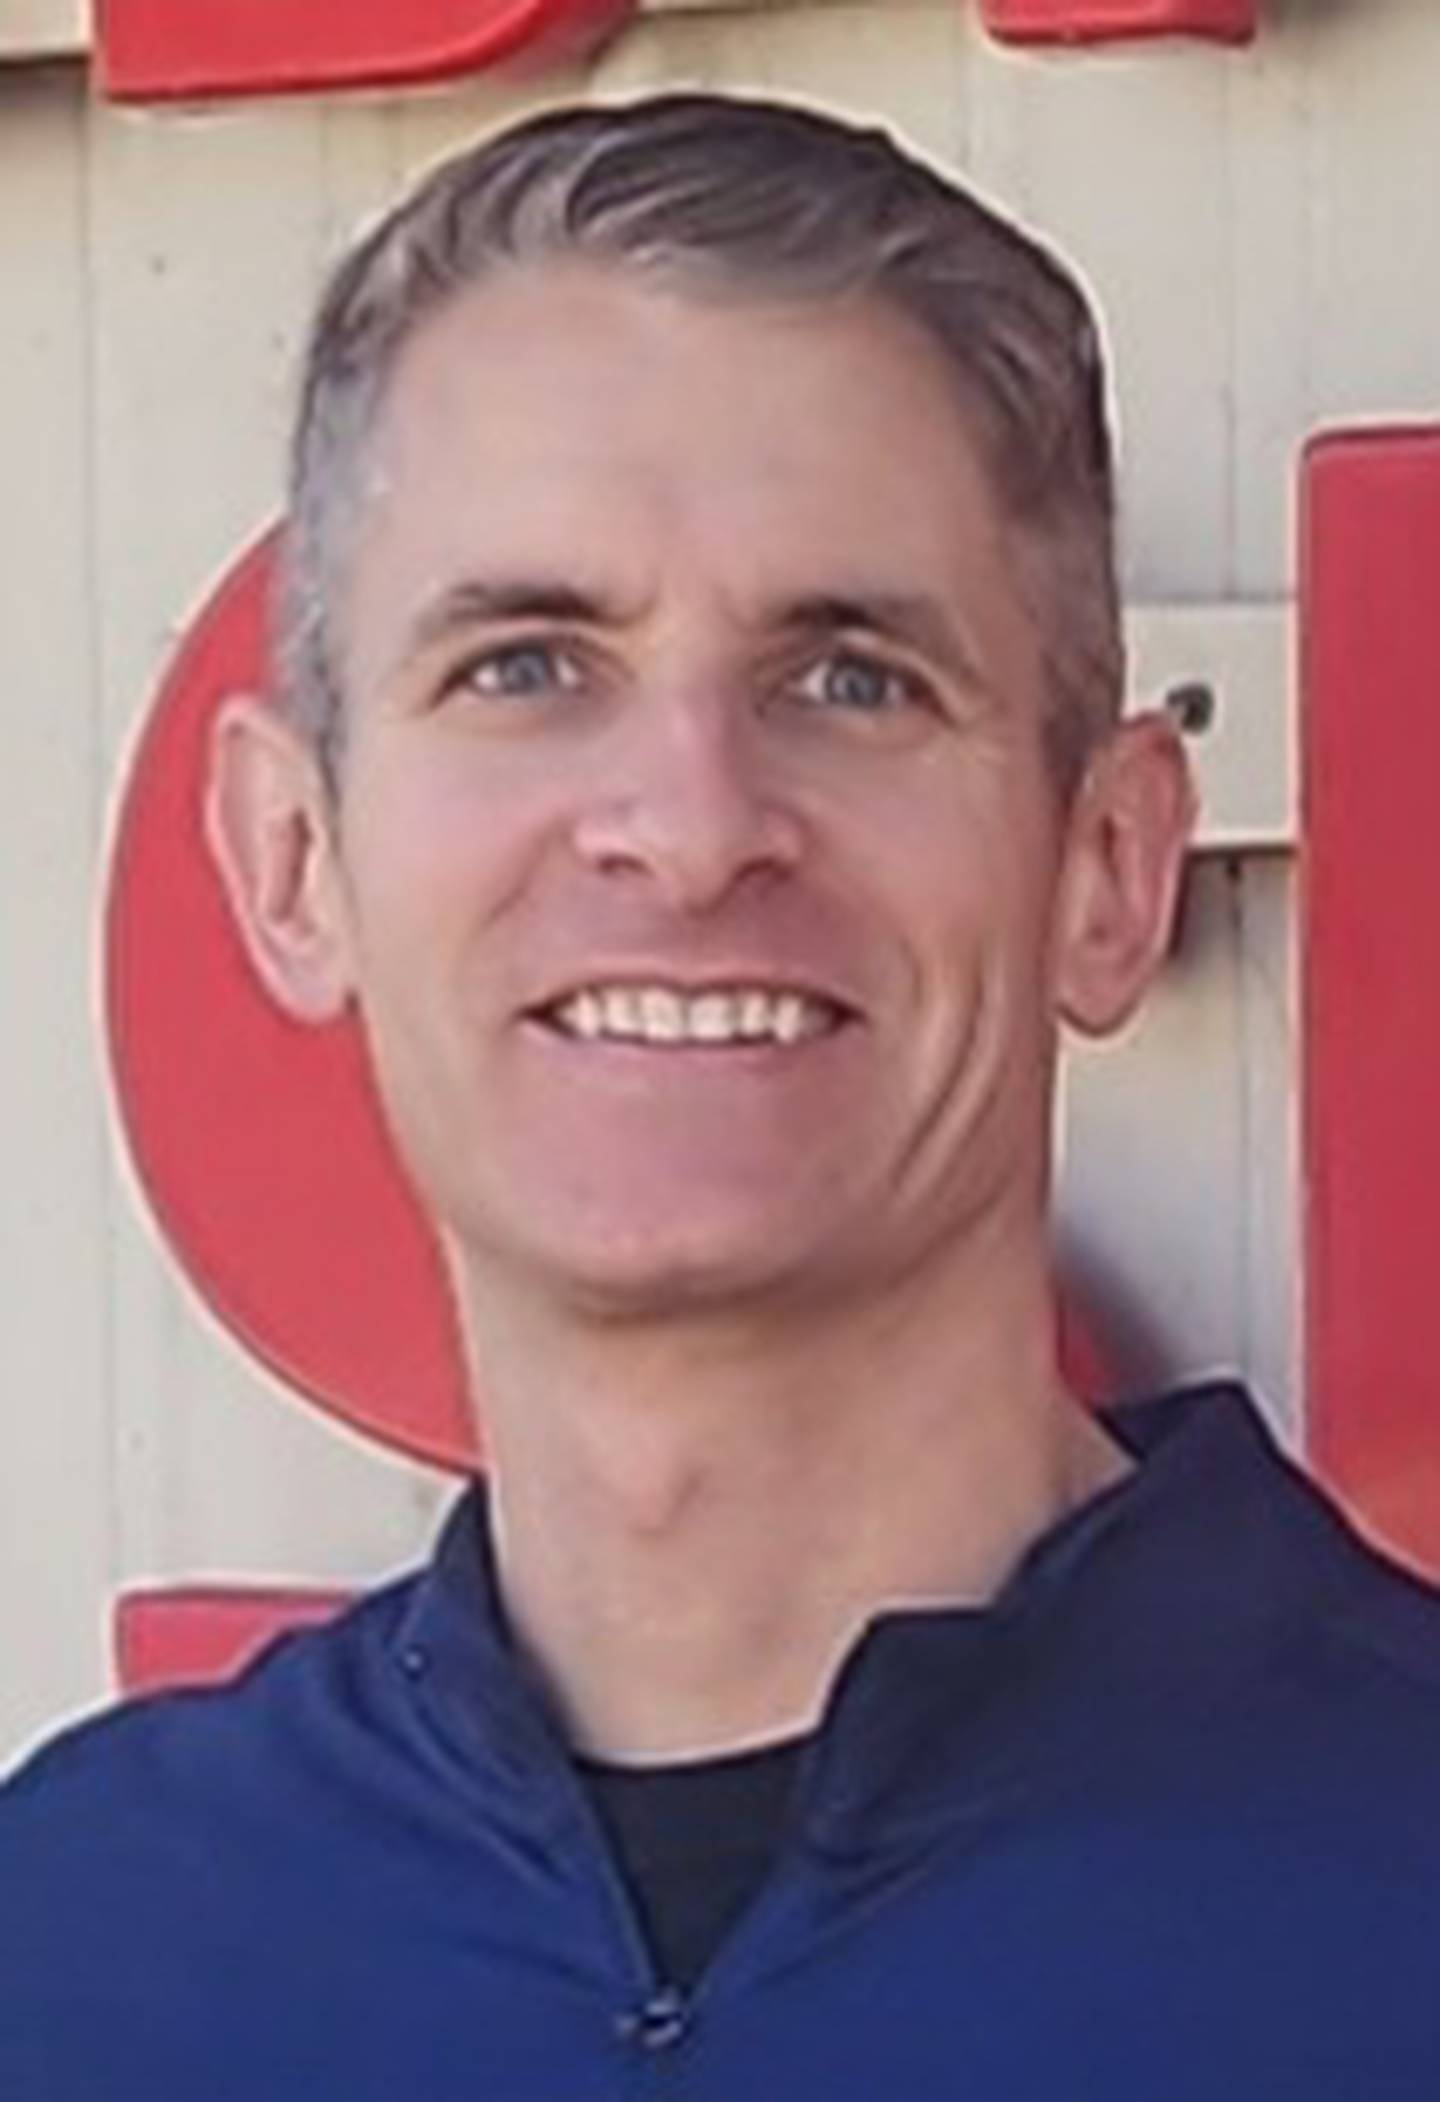 Newcomer Andy Arnold is running for Peru City Council second ward alderman in the election on Tuesday, April 4, 2023.